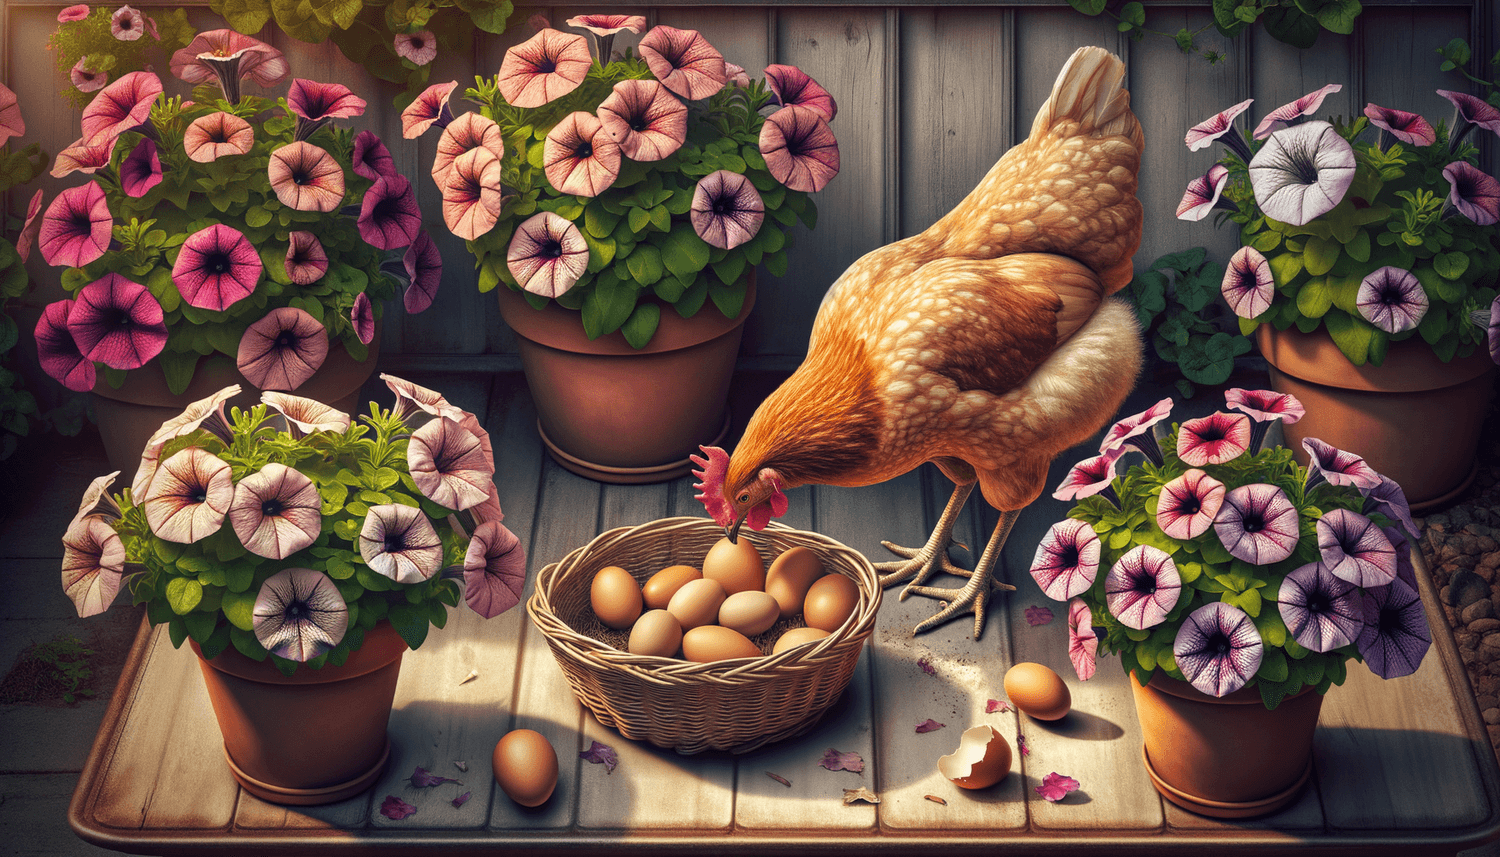 Can Chickens Eat Petunias?